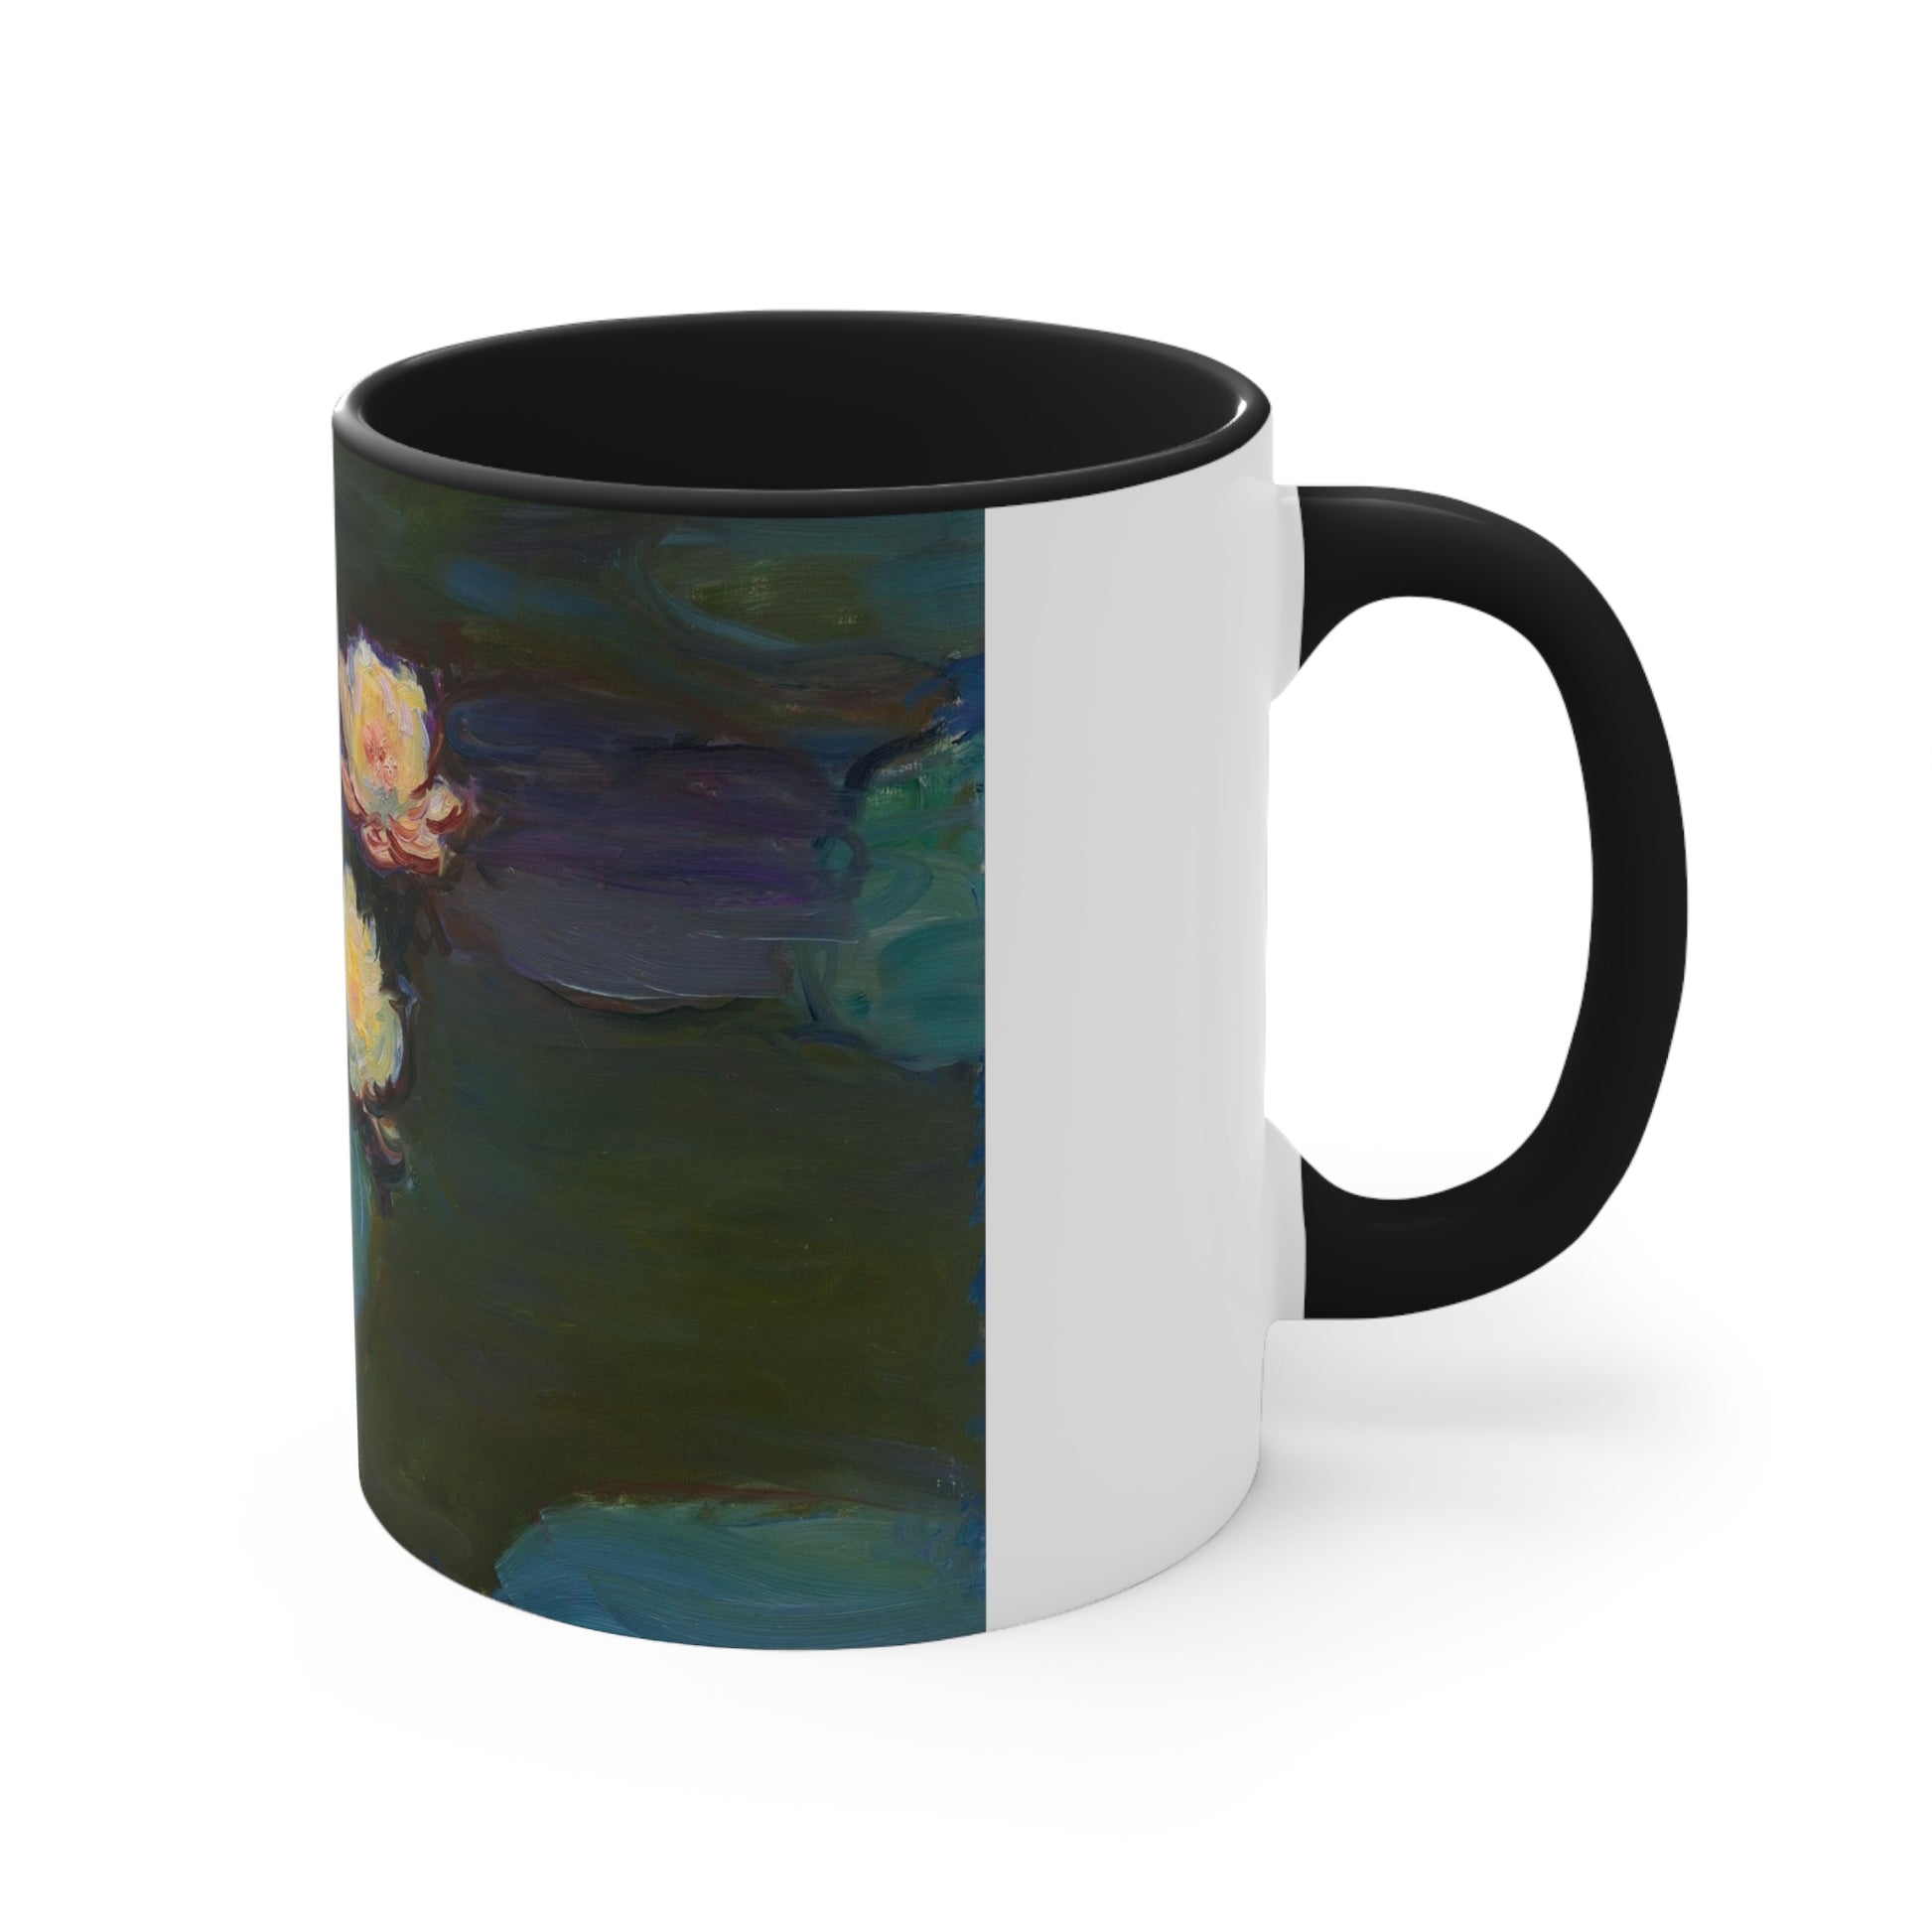 a black and white coffee mug with a painting of a flower